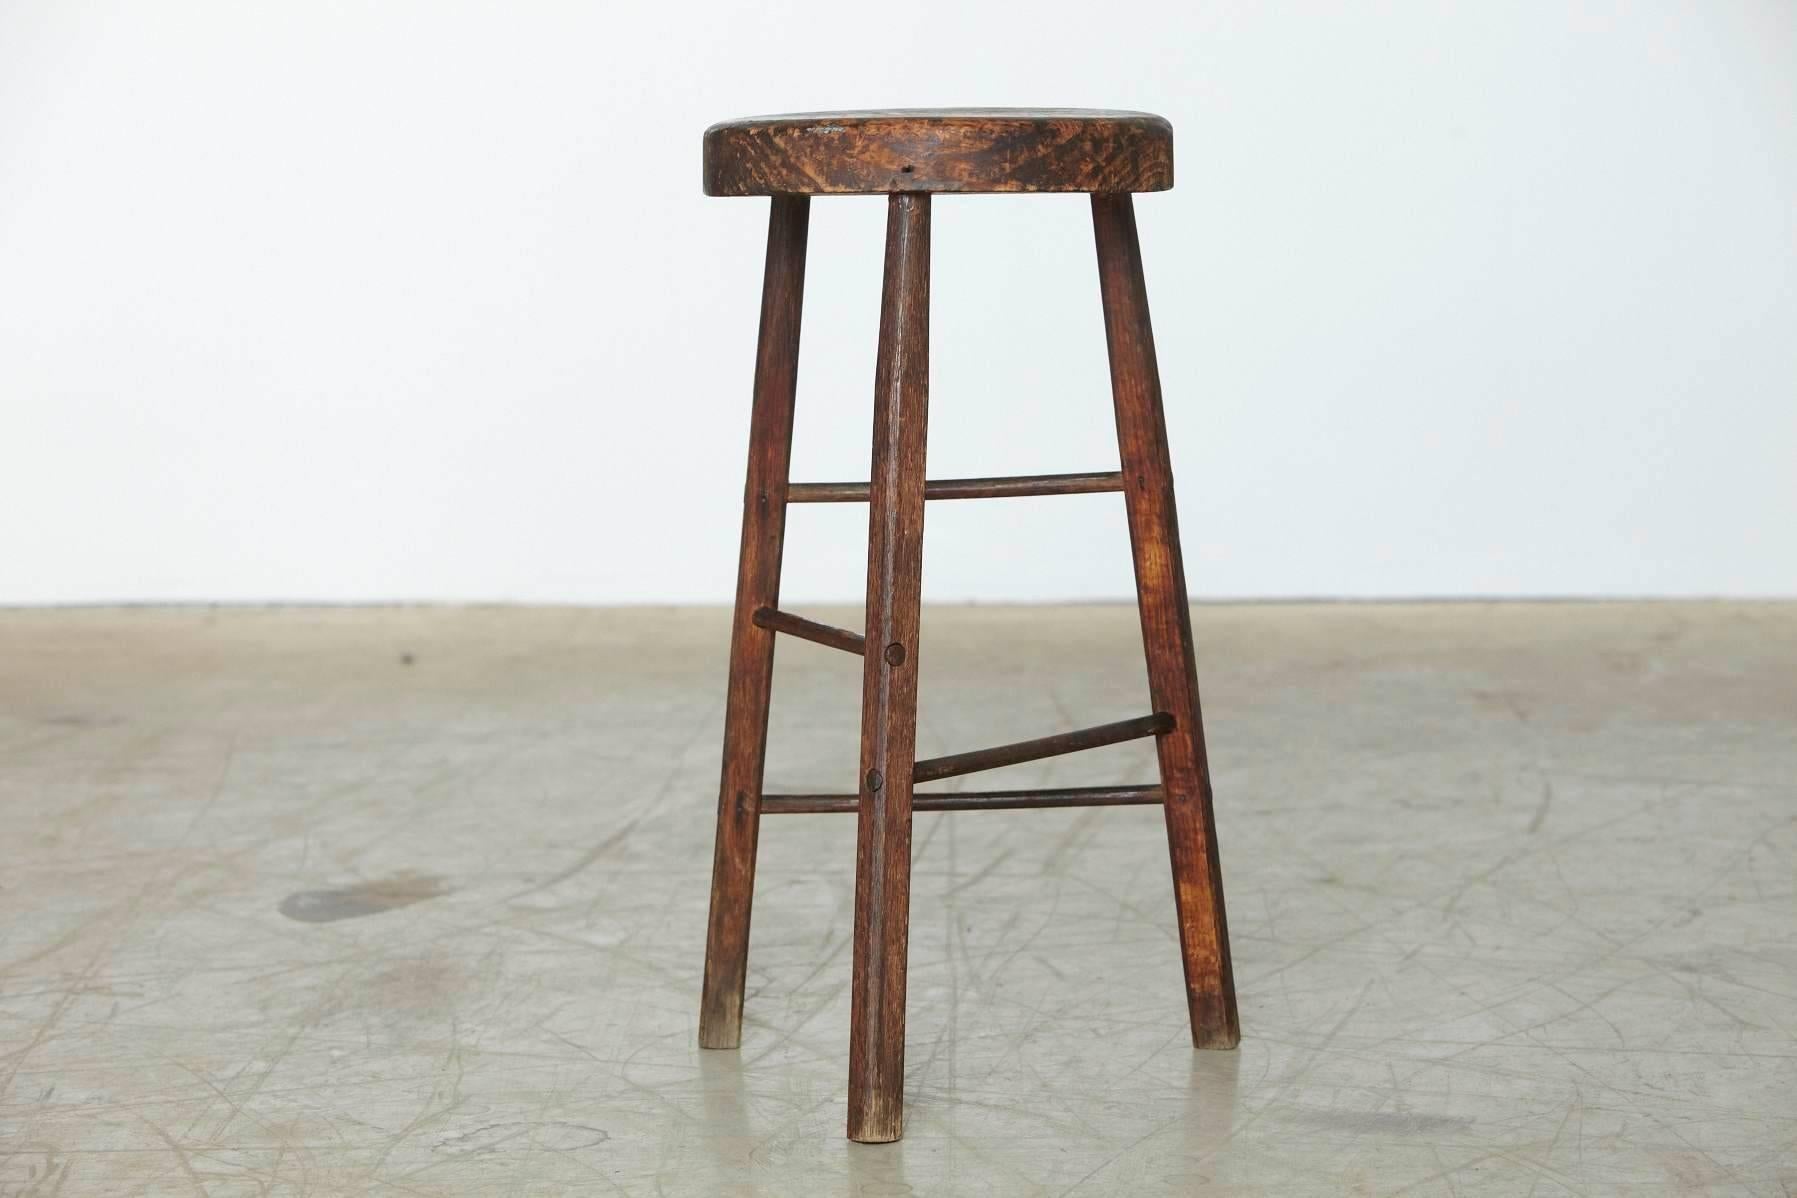 Minimalist rustic three legged wooden stool with thick top.